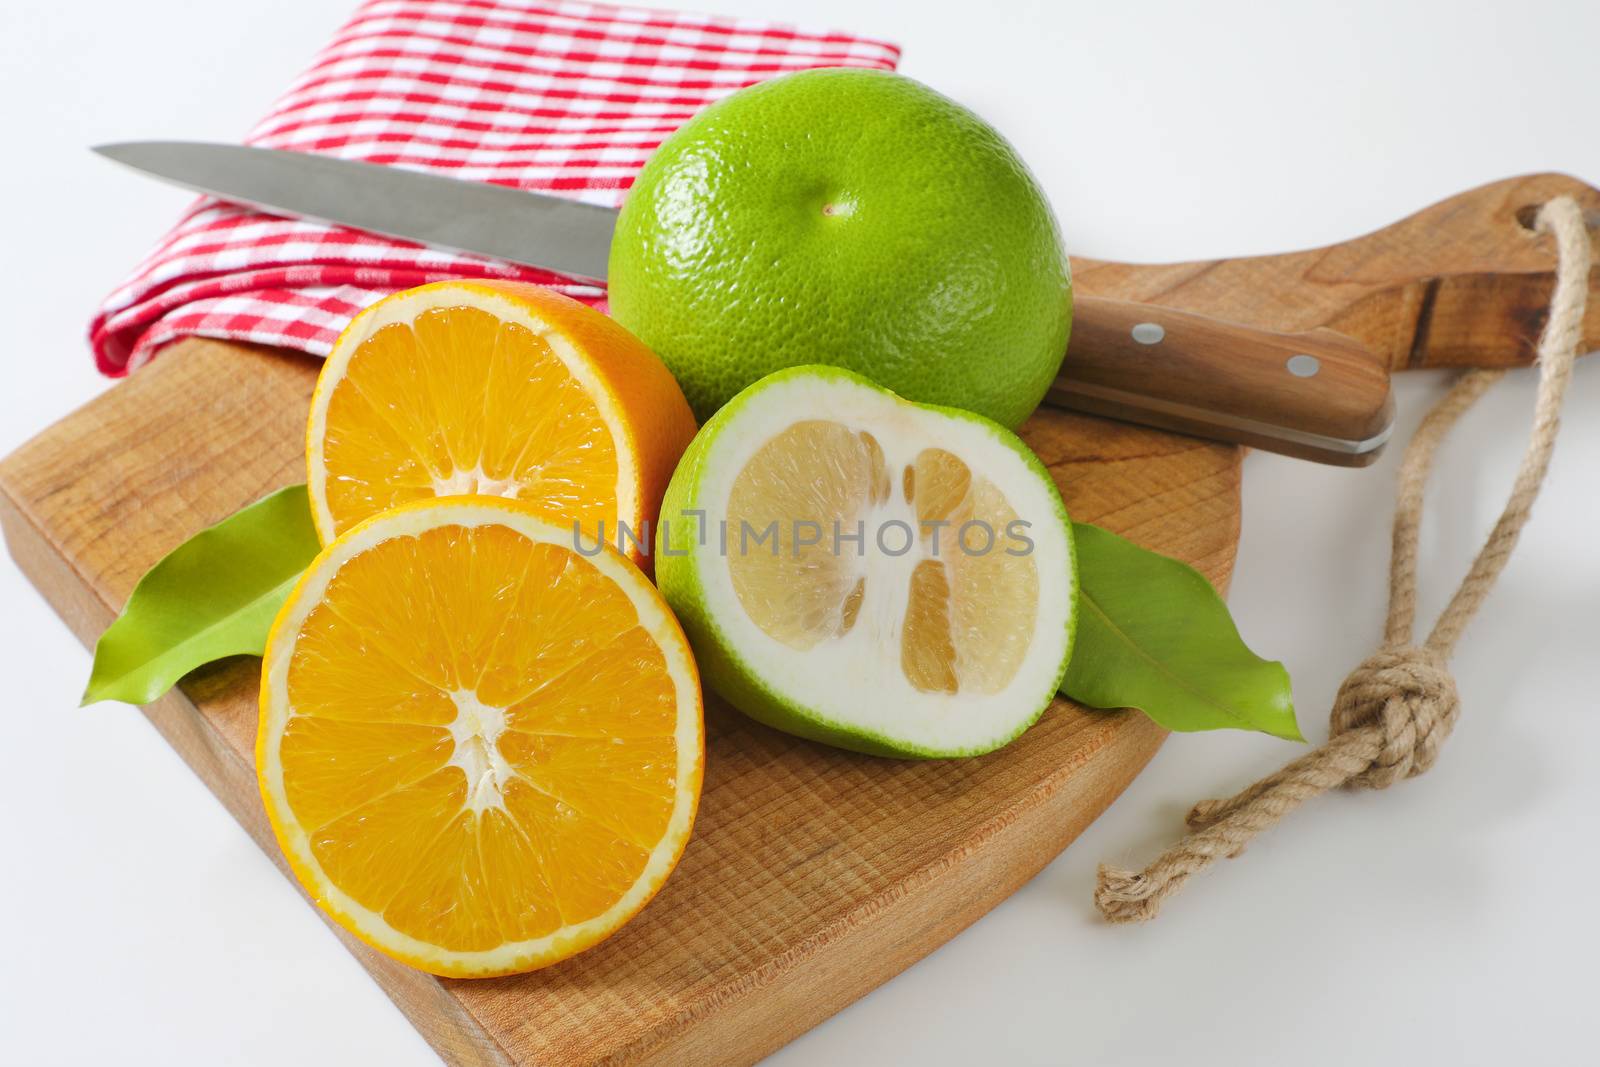 Green grapefruits and halved orange by Digifoodstock